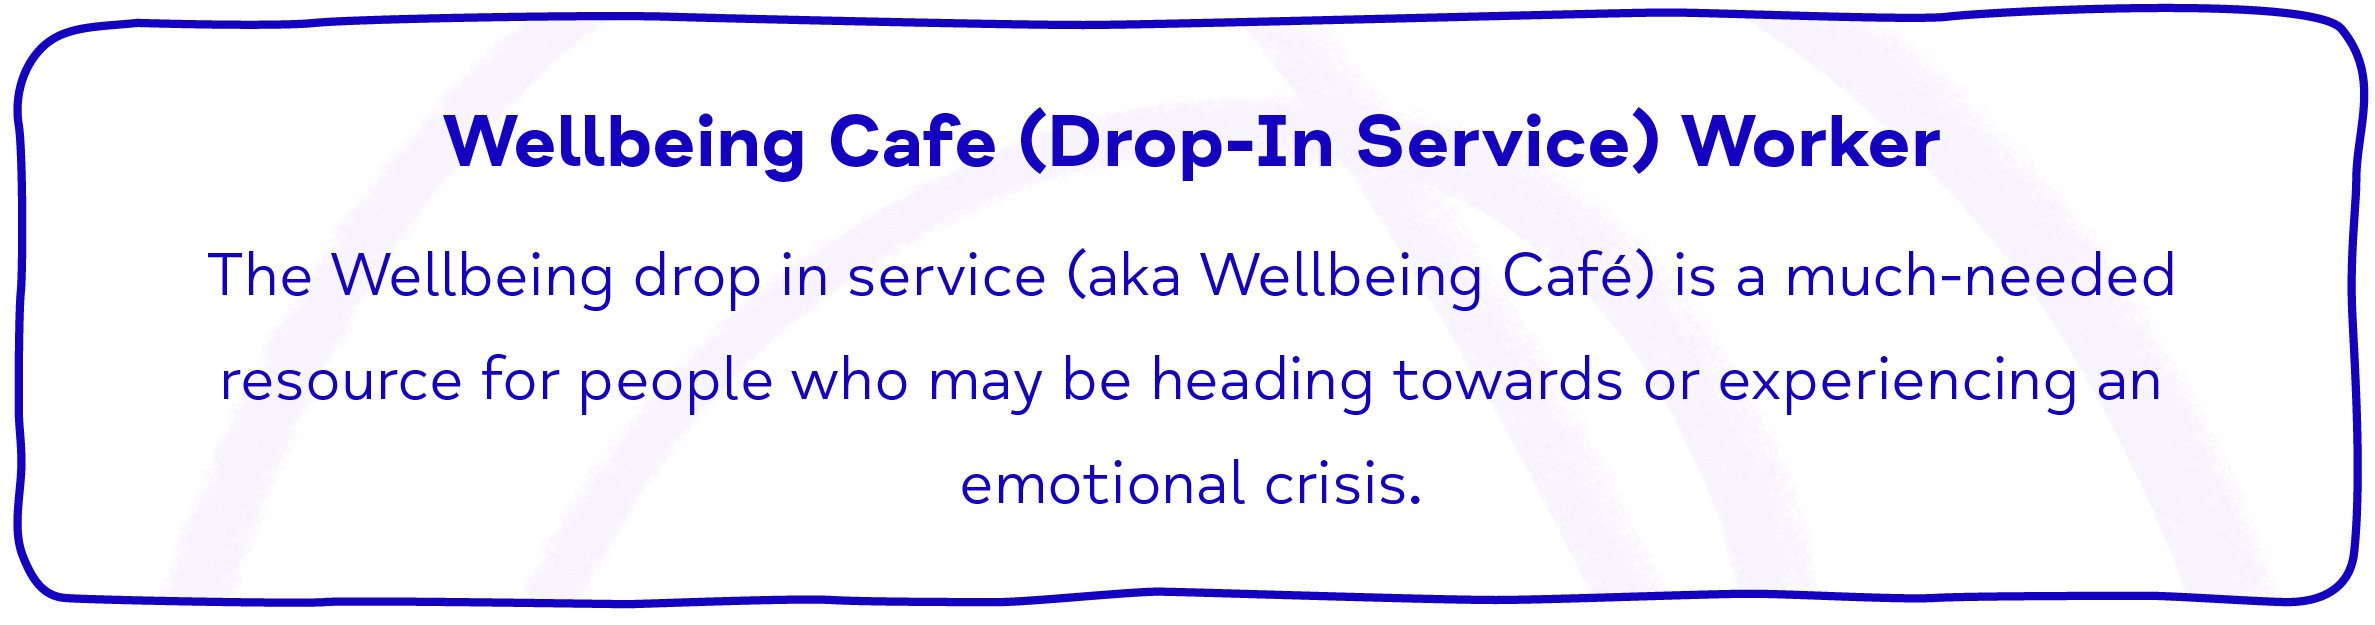 Wellbeing Cafe (Drop-In Service) Worker The Wellbeing drop in service (aka Wellbeing Café) is a much-needed resource for people who may be heading towards or experiencing an emotional crisis.